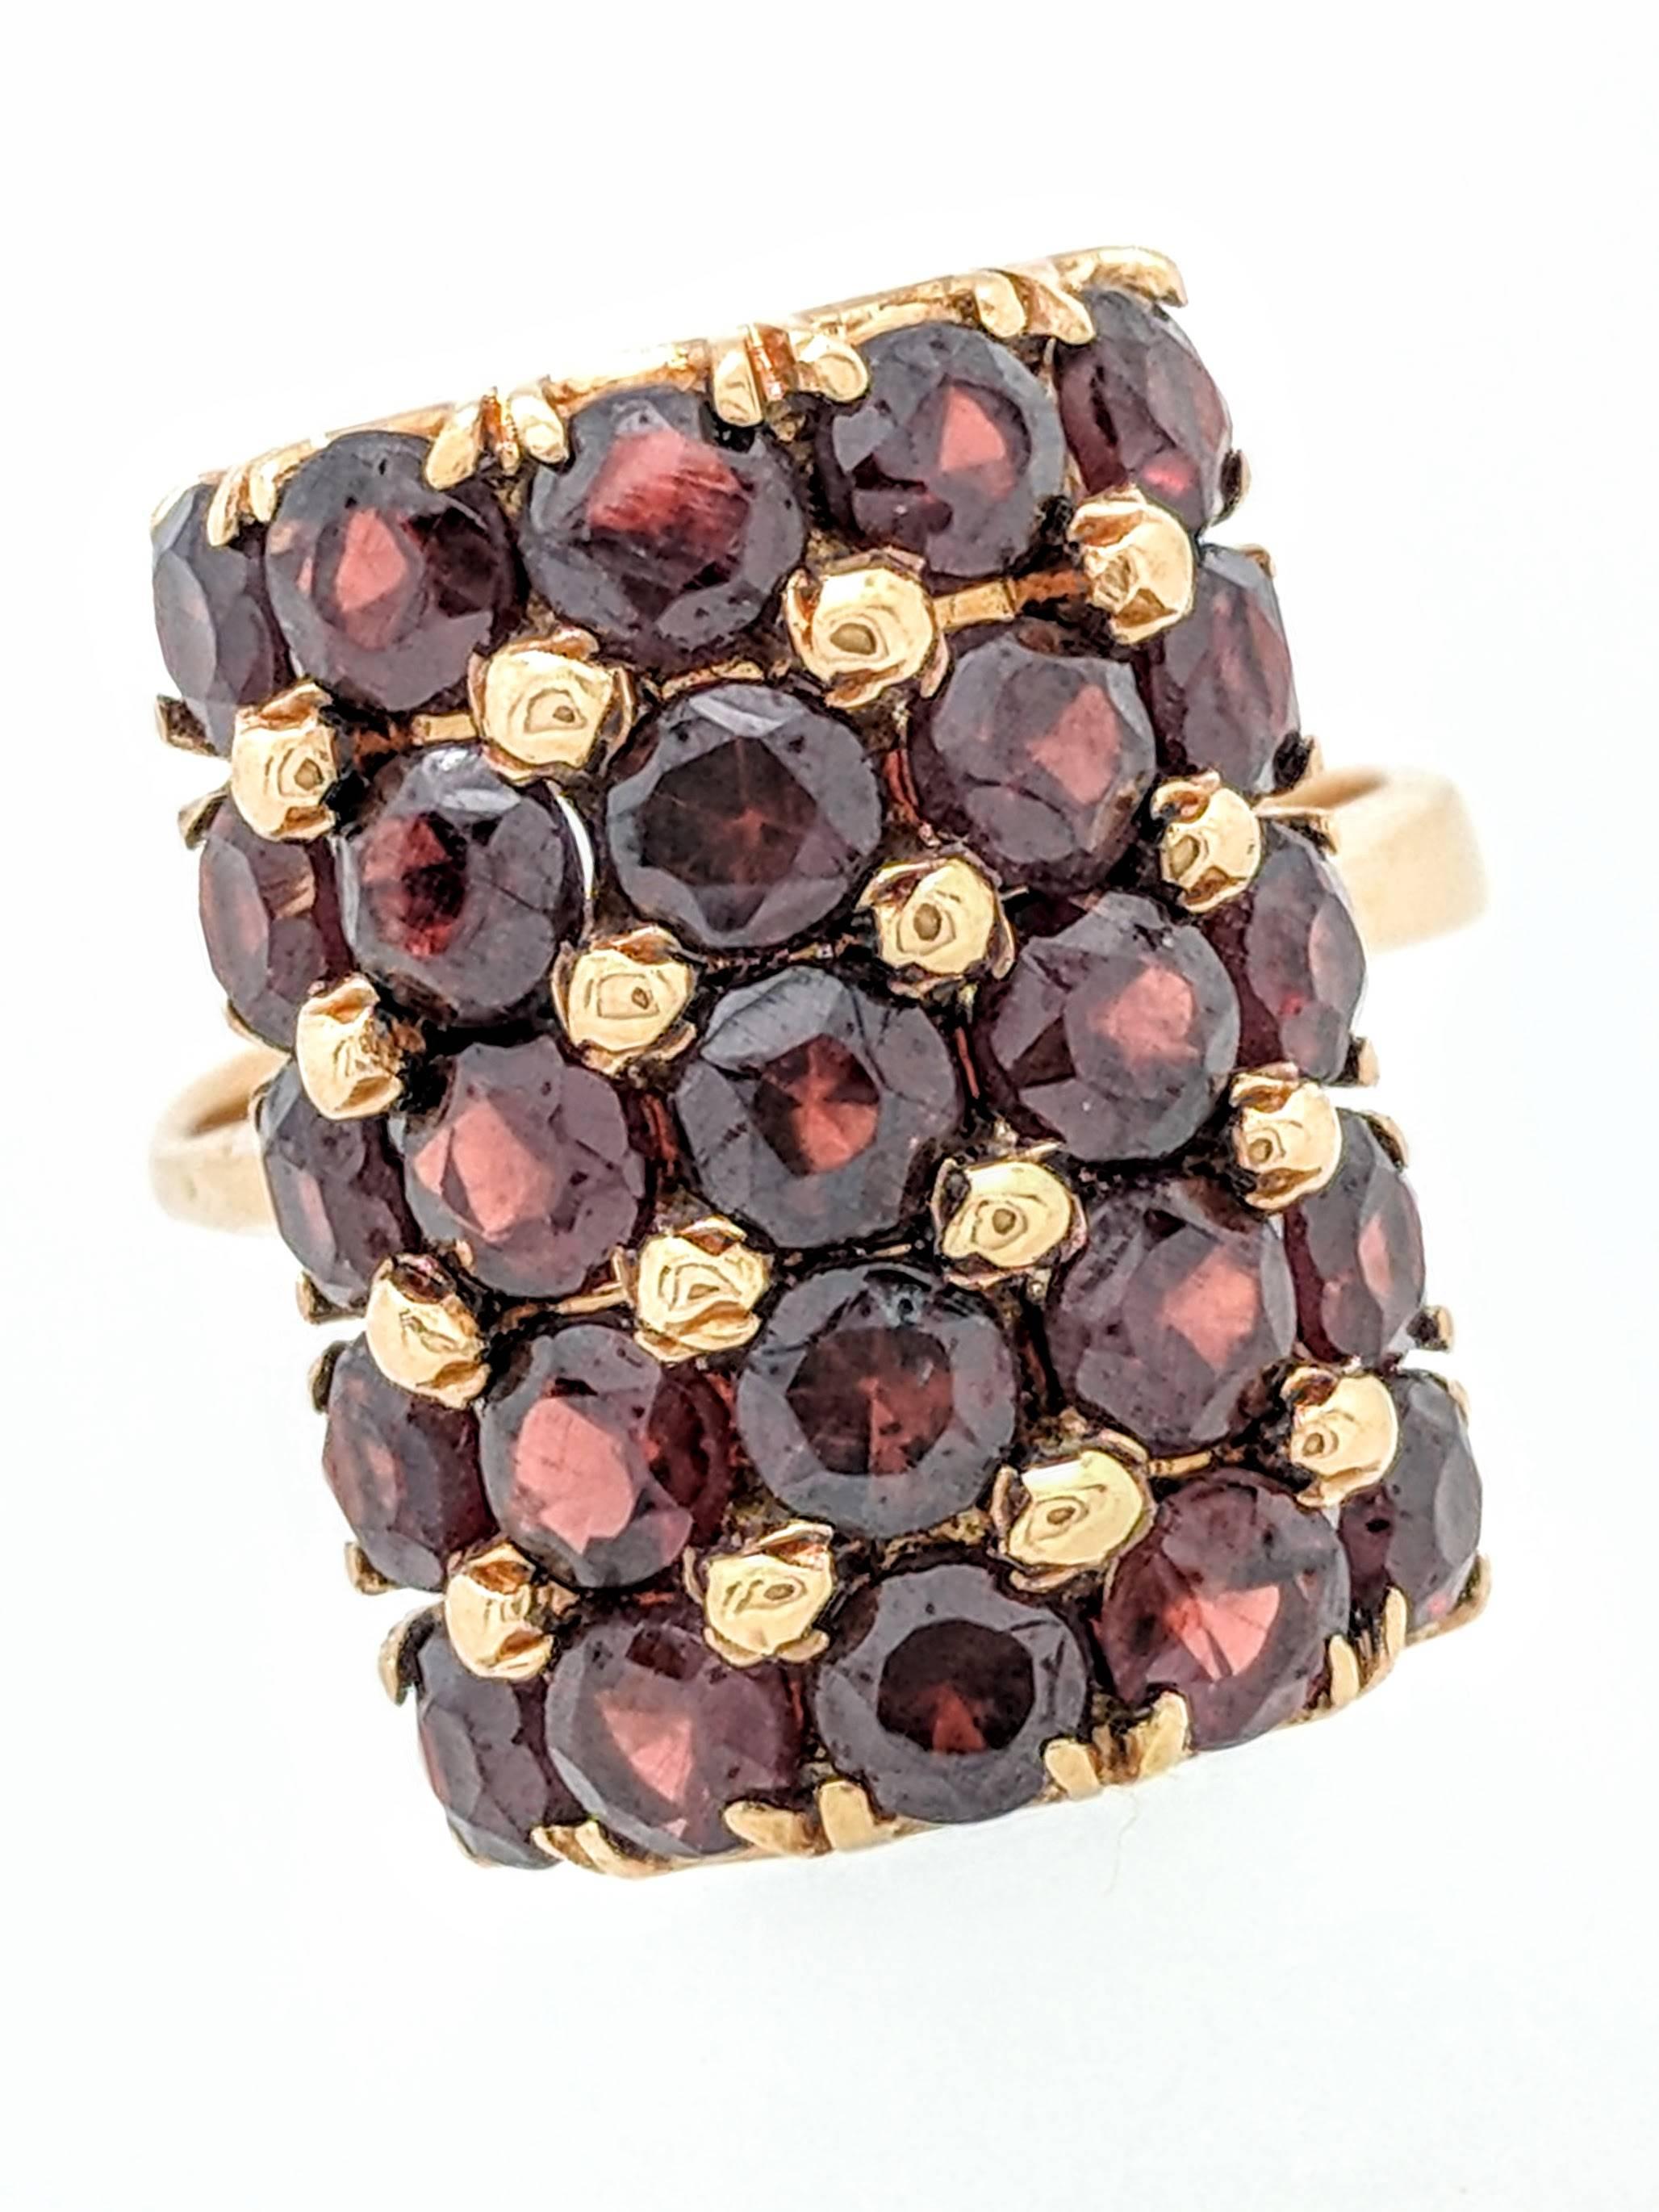 Ladies 18k Yellow Gold Dome Multi Row Garnet Ring Size 5

You are viewing a beautiful ladies dome multi row Garnet Gemstone ring.  This ring is crafted from 18k yellow gold and weighs 7.8 grams.  It features (25) .05ct natural round prong set